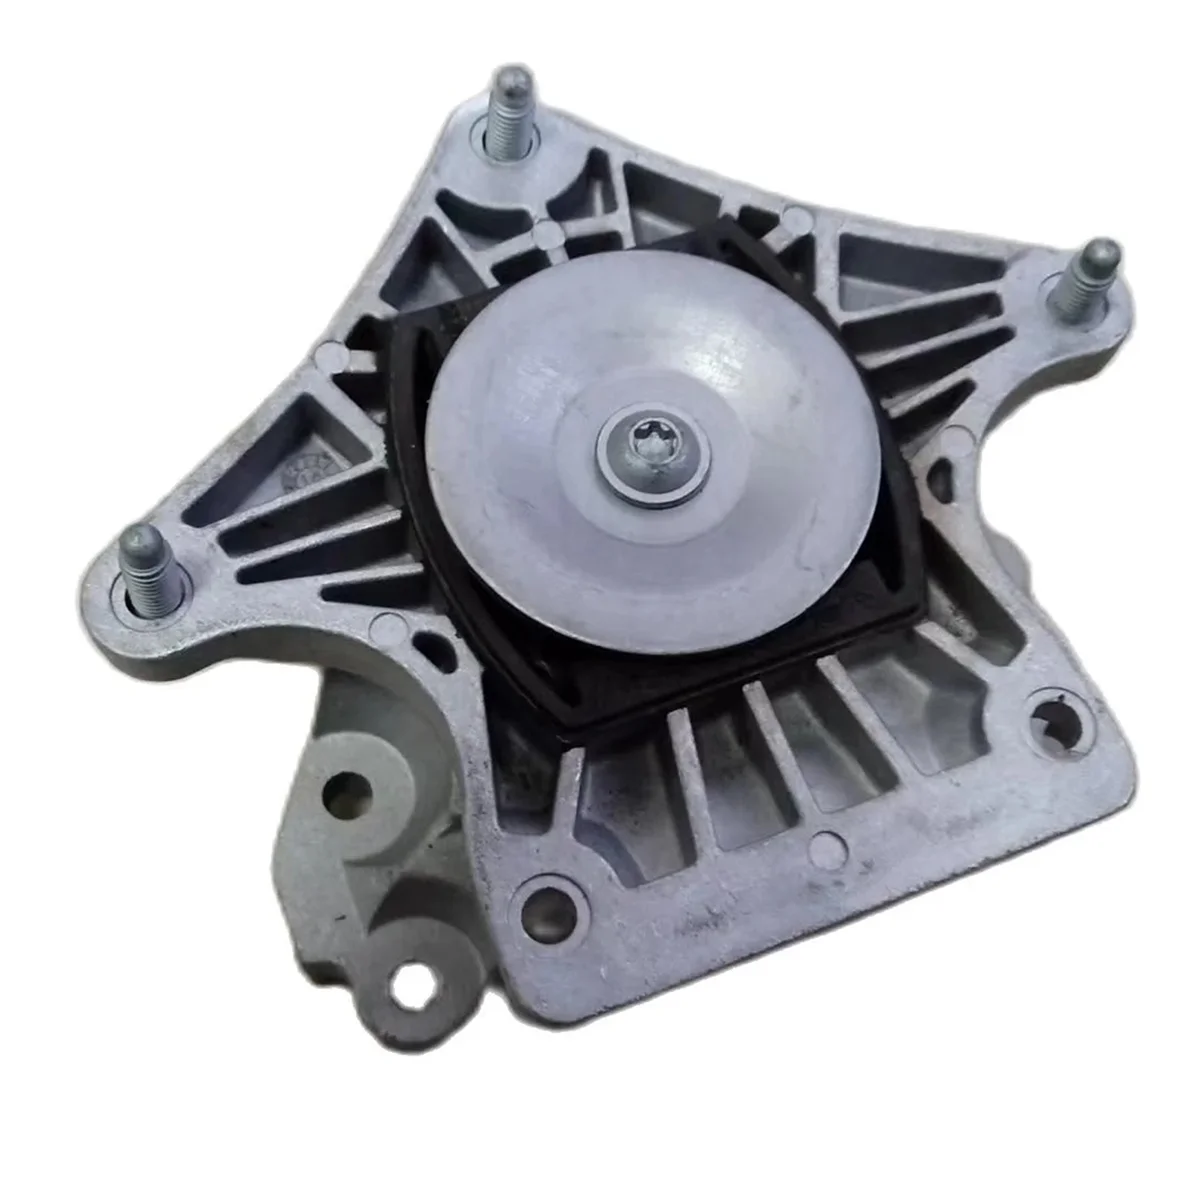 A2052402500 Engine Foot Gearbox Auto for Mercedes Benz W205 E300 GLC300 W213 - £153.33 GBP